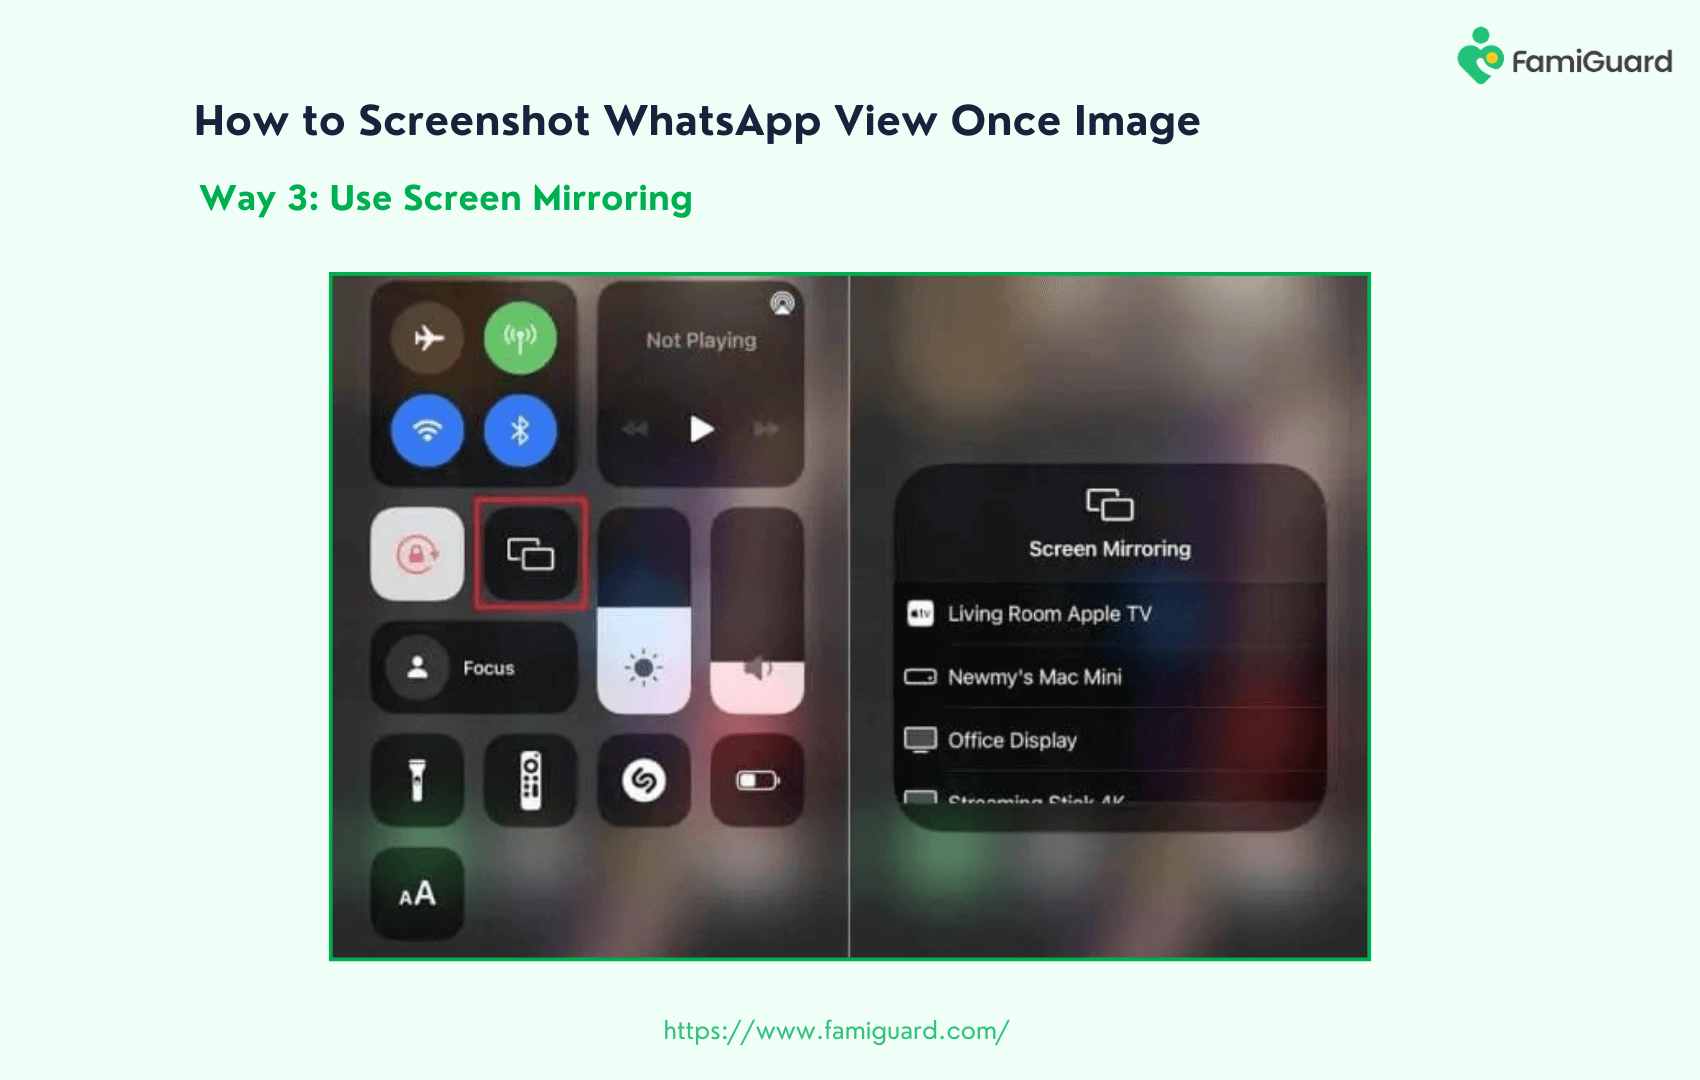 Use Screen Mirroring to Screenshot WhatsApp View Once Image